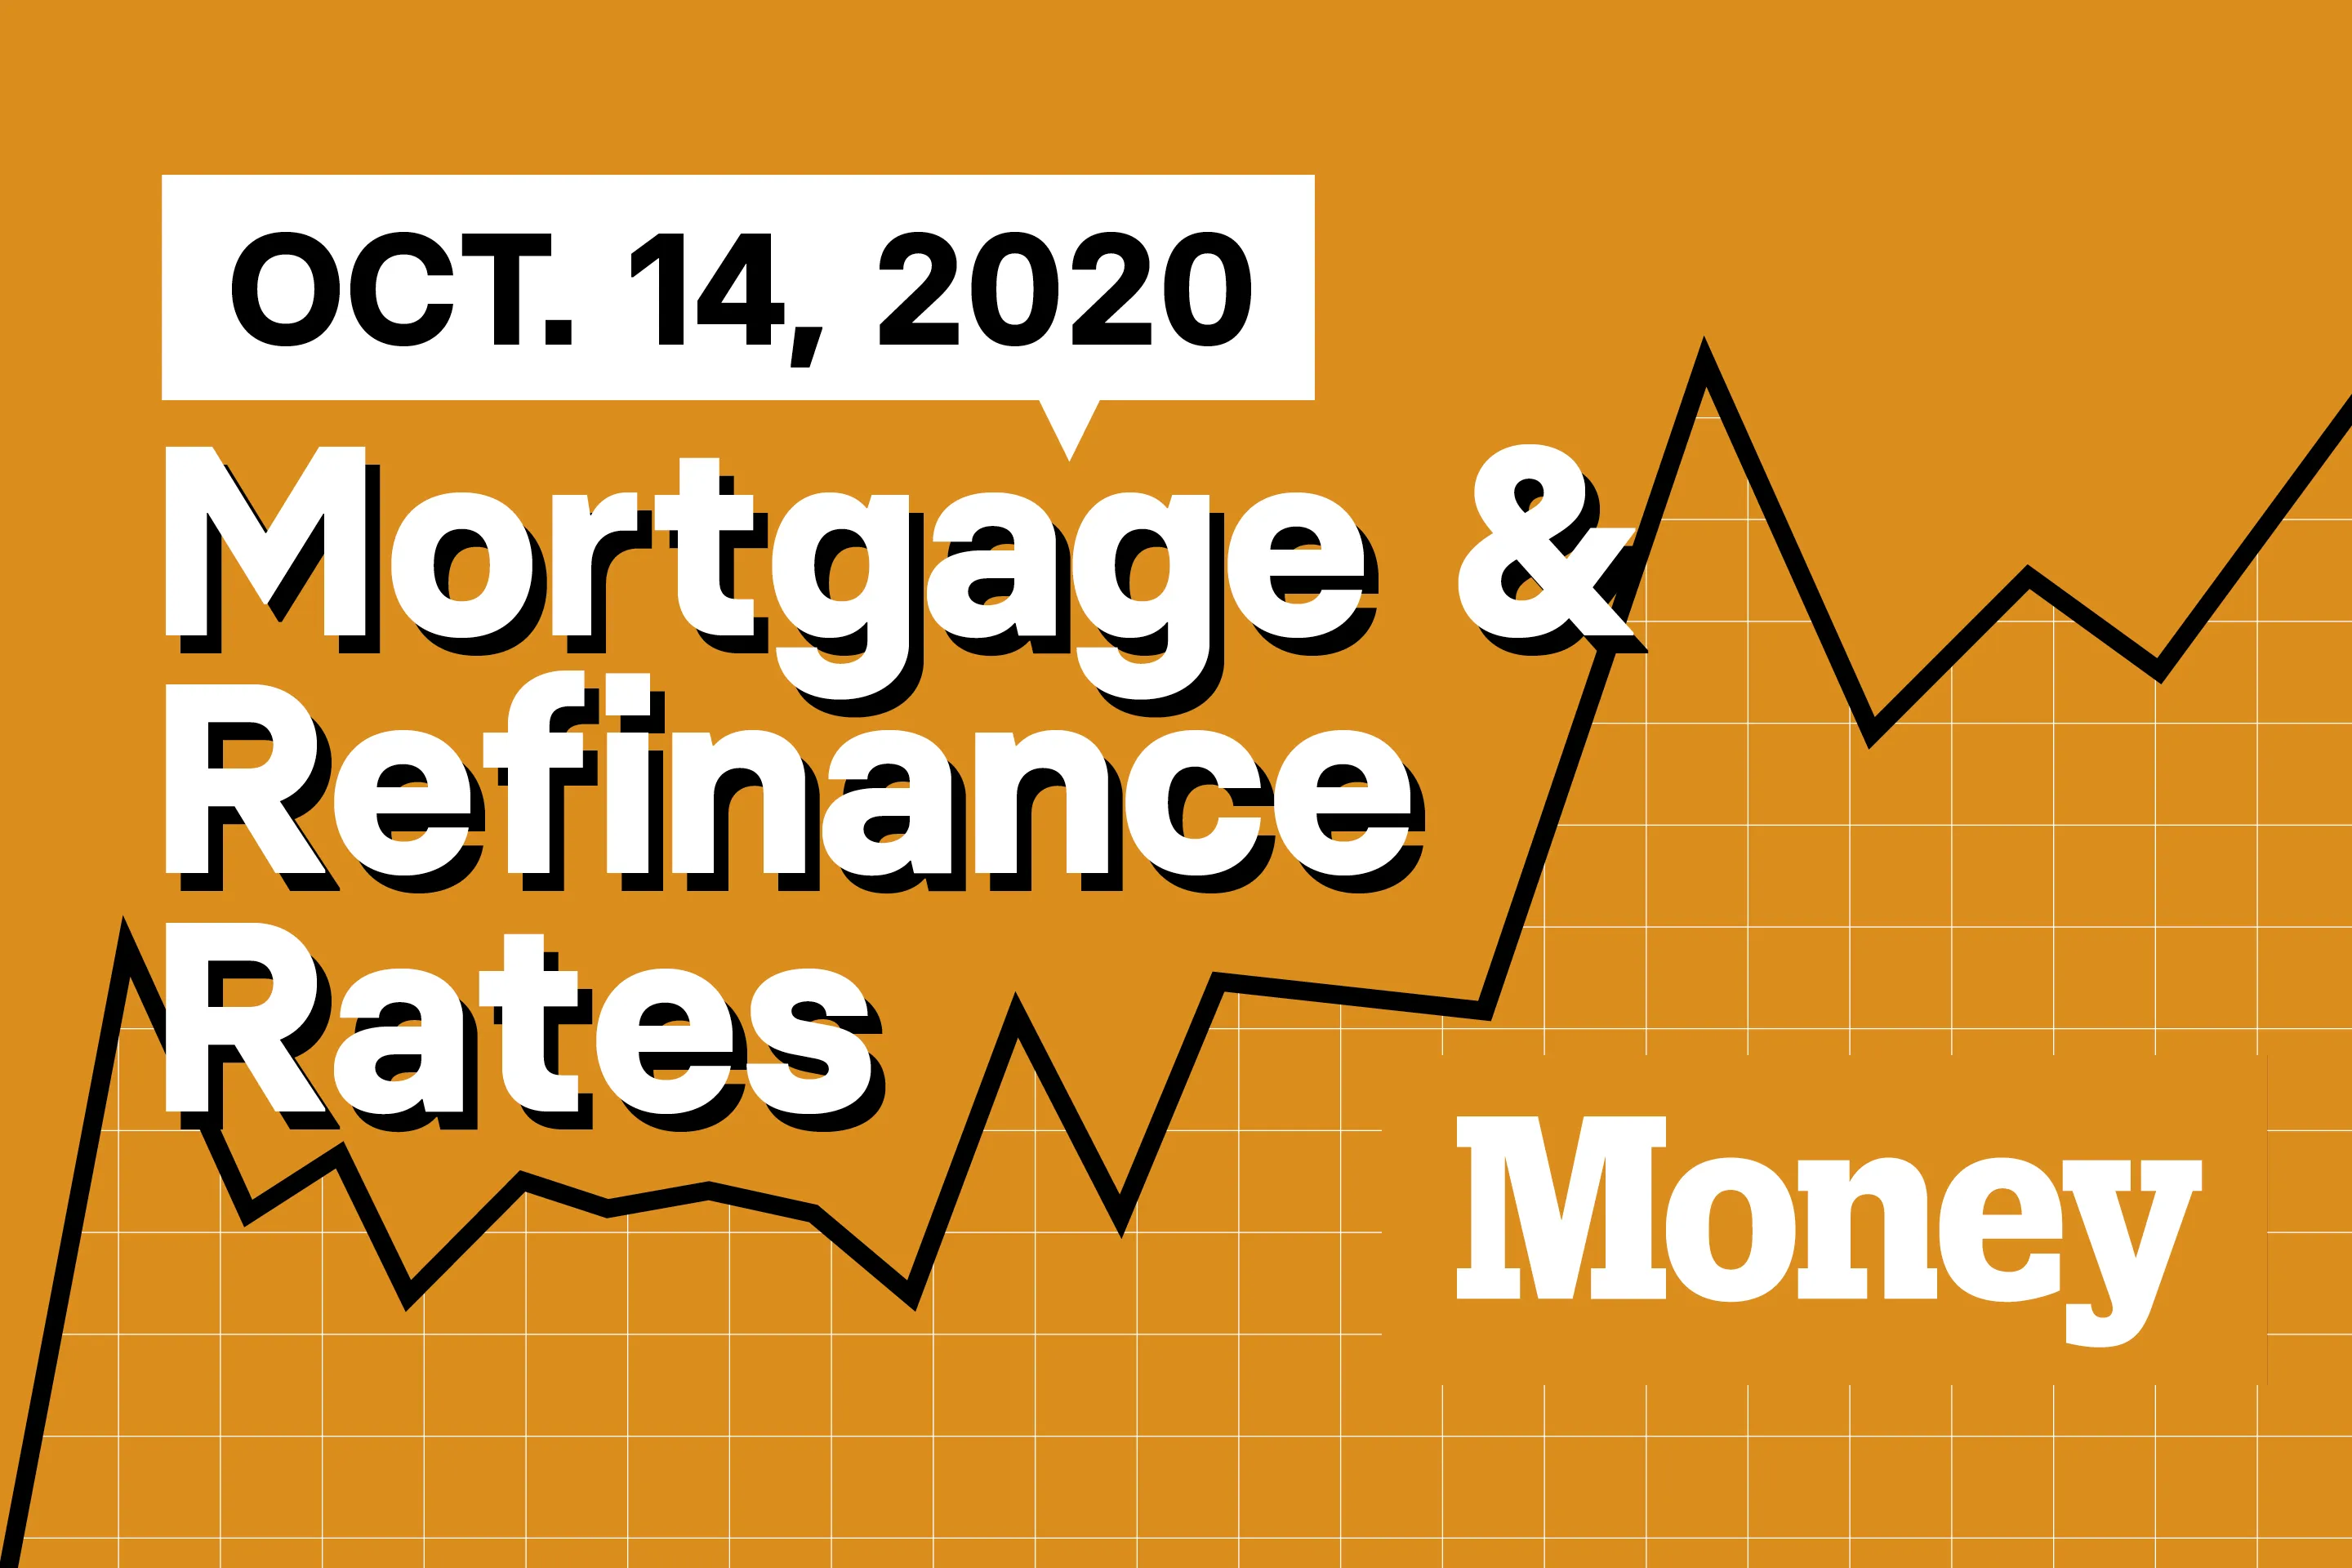 Here Are Today's Best Mortgage & Refinance Rates for October 14, 2020